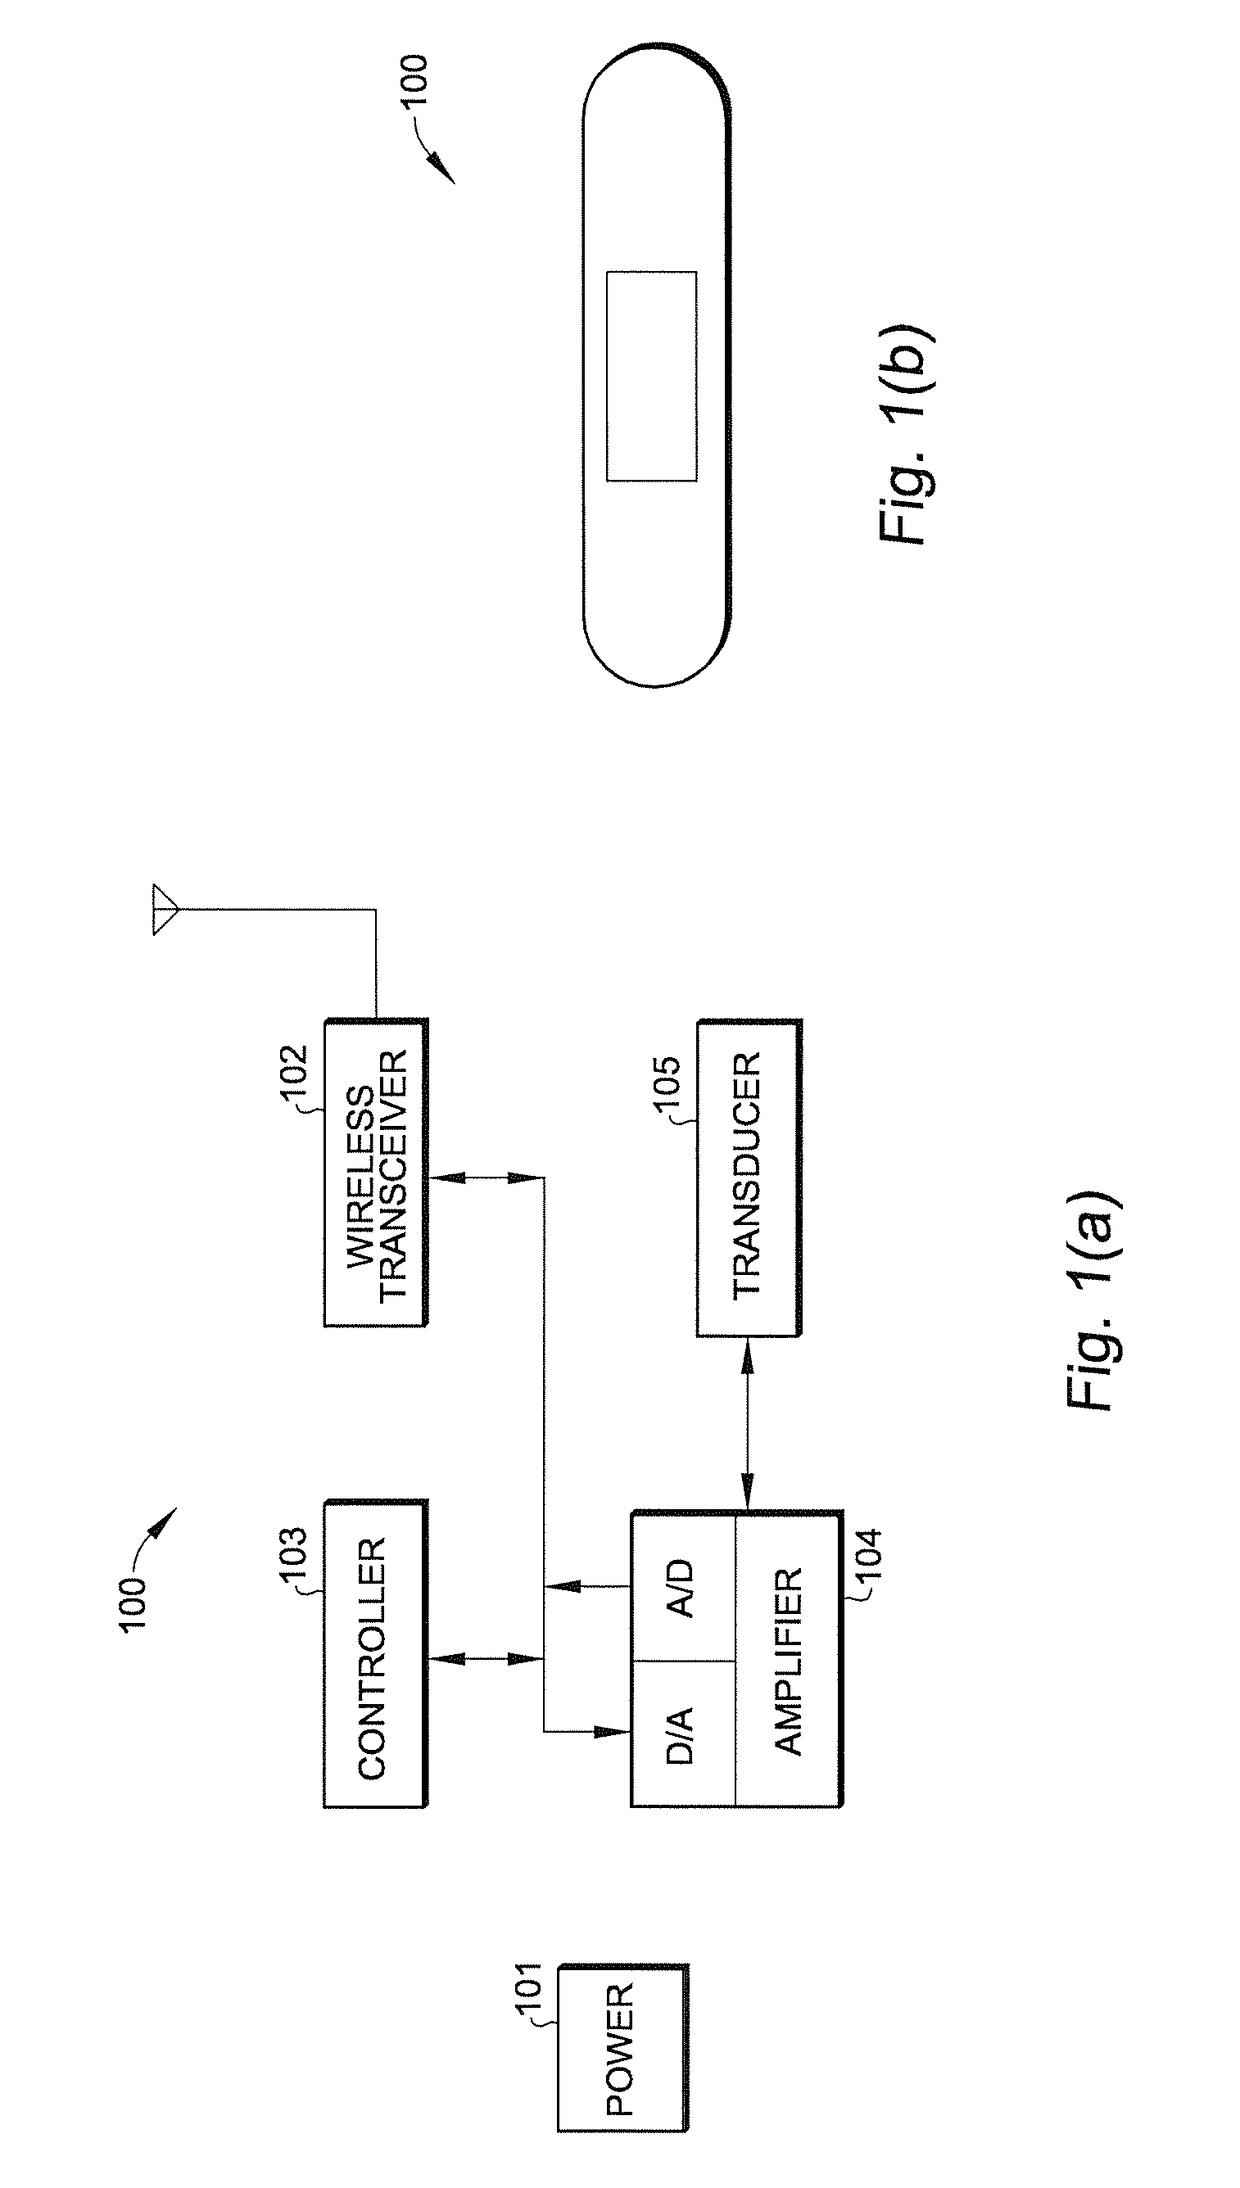 Hands-free, wearable vibration devices and method